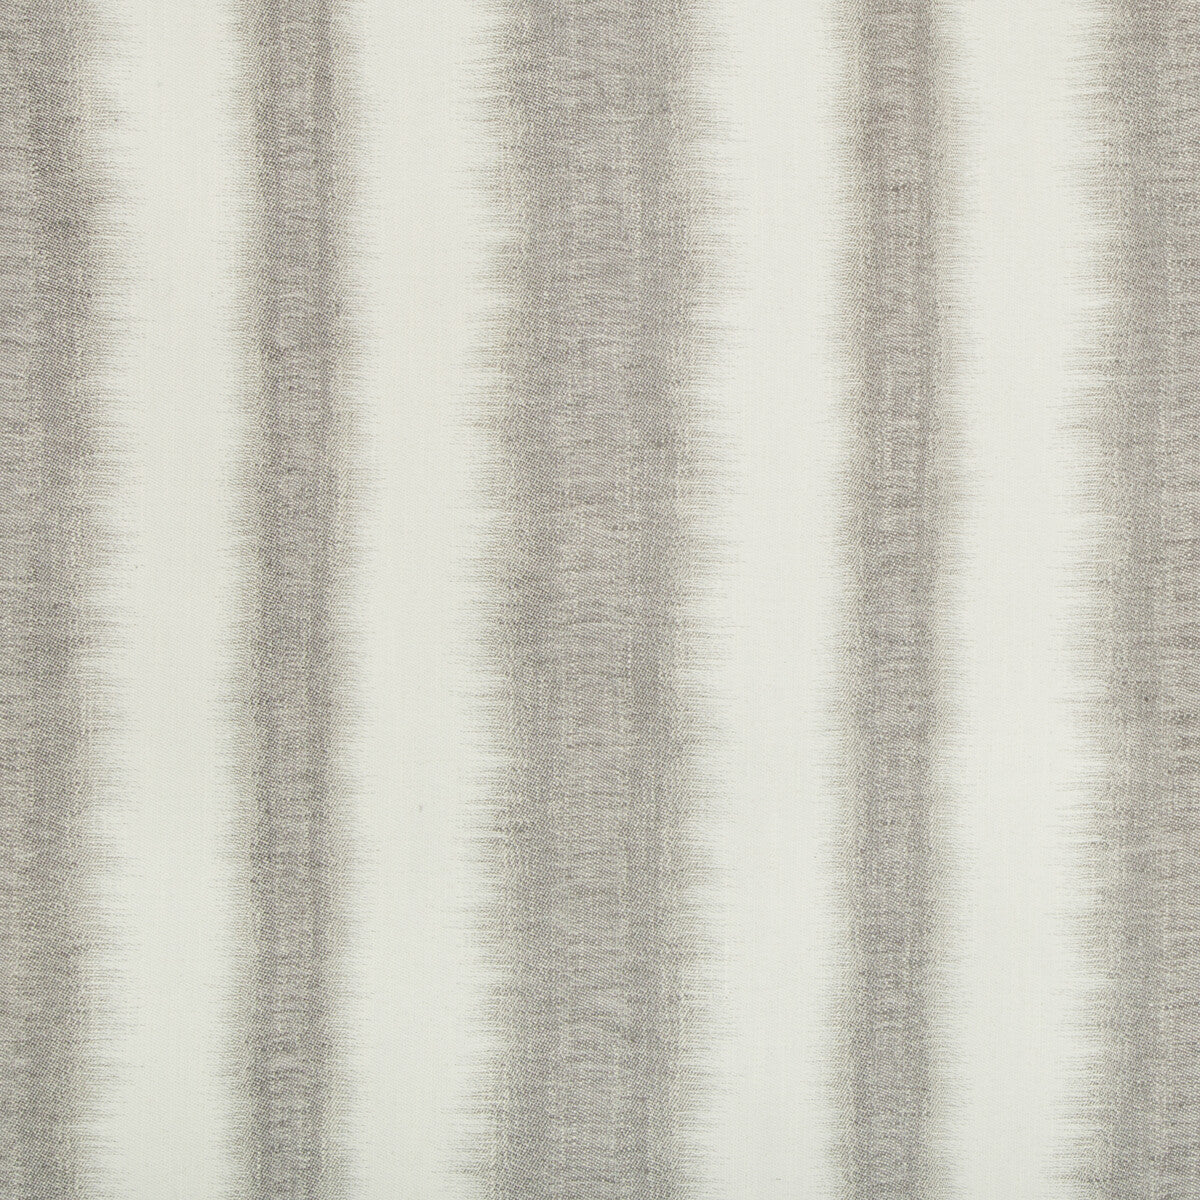 Windswell fabric in pewter color - pattern 34979.11.0 - by Kravet Basics in the Jeffrey Alan Marks Oceanview collection